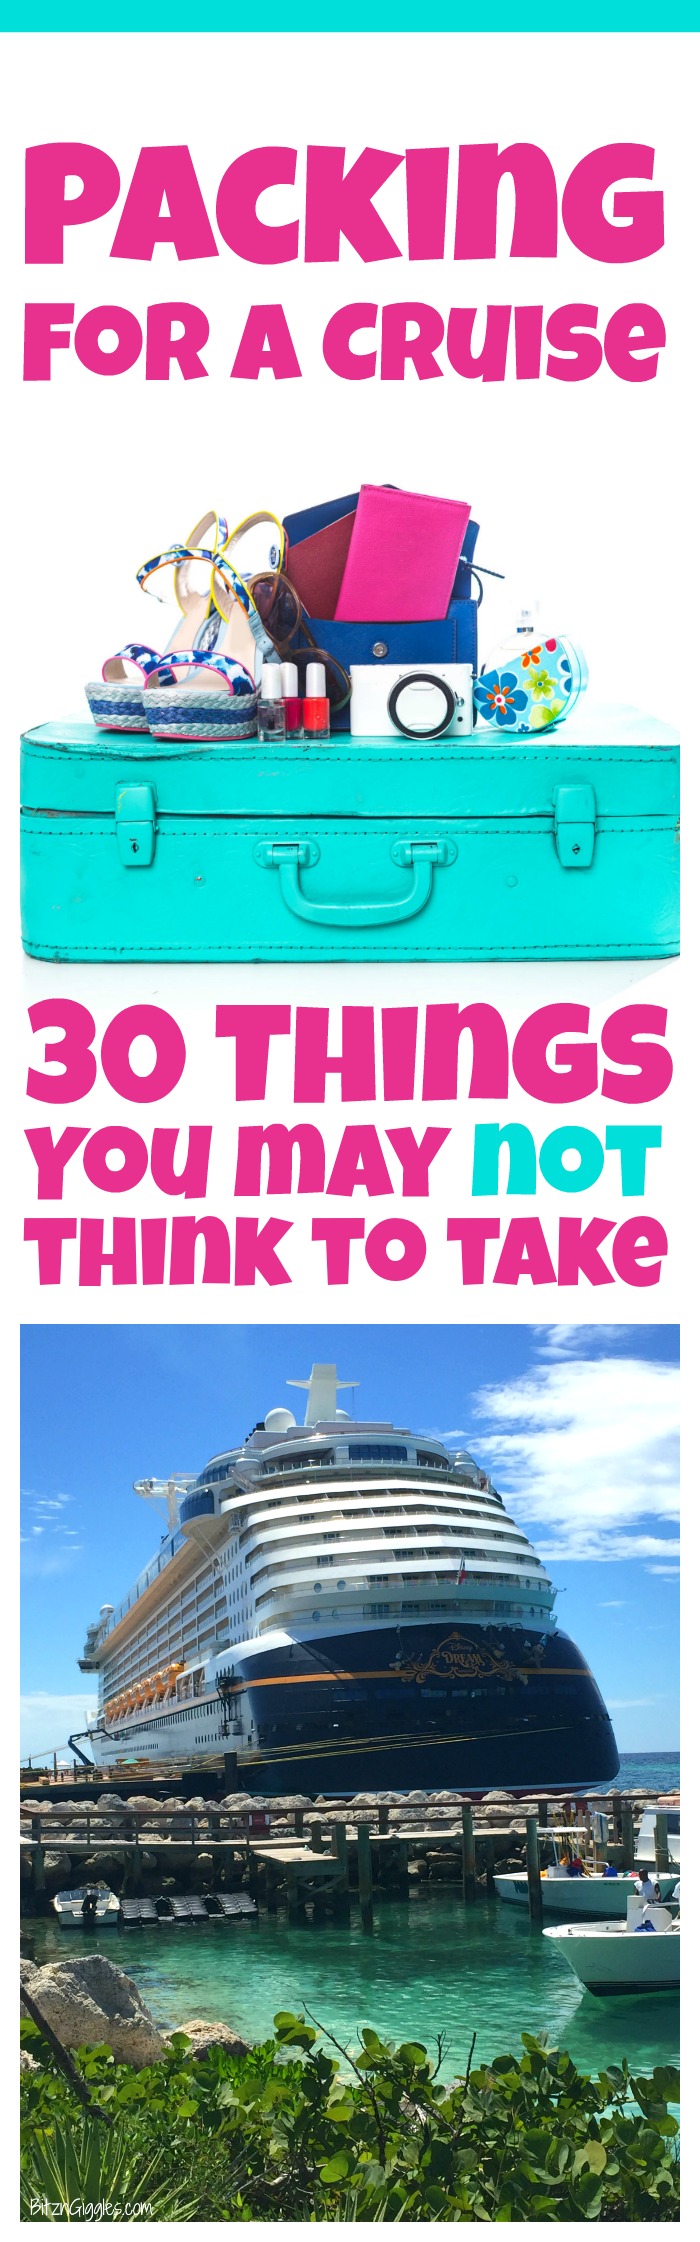 Packing for a Cruise: 30 Things You May Not Think to Take - Whether you're a first time or seasoned cruiser, you need to read this list before taking your next cruise vacation!